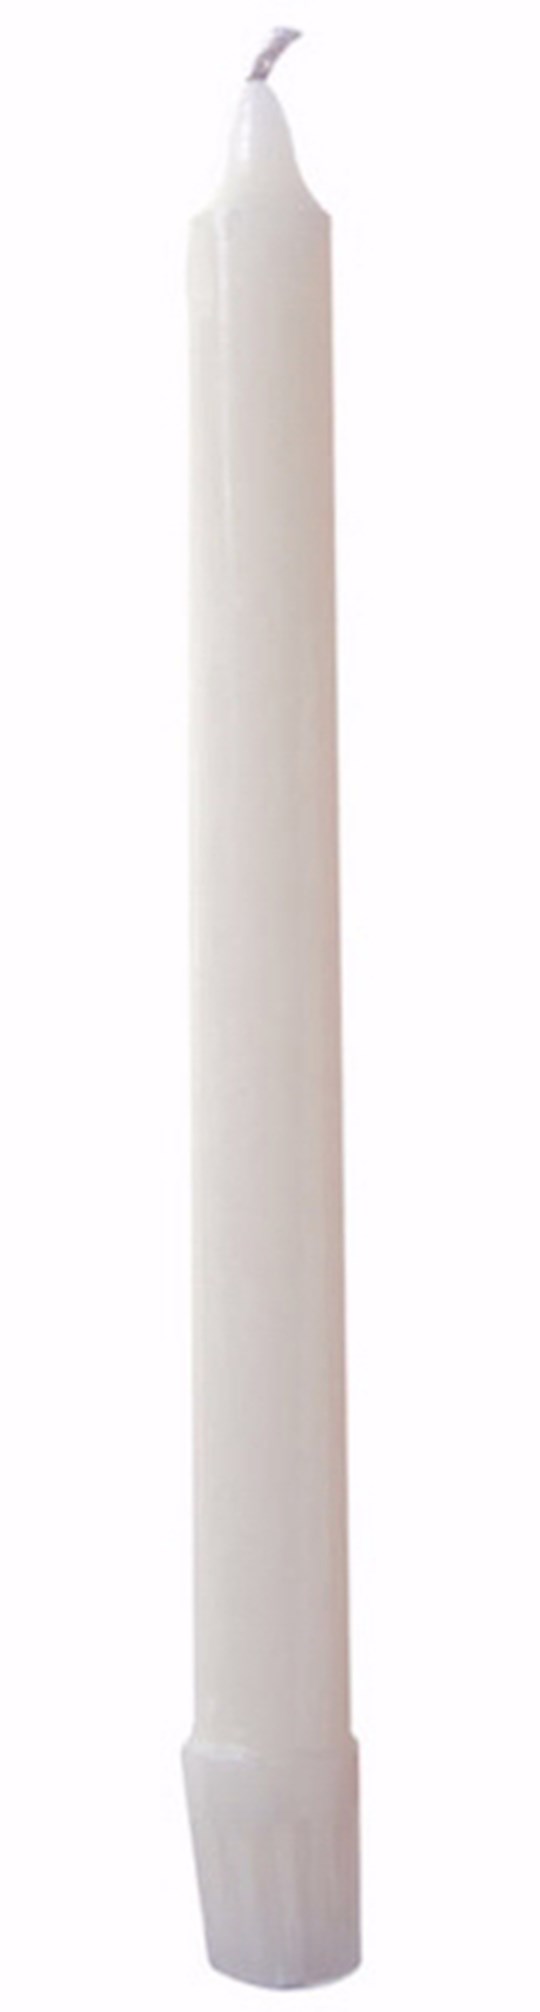 {=Candle-Altar Candle-White (12" x 7/8")-Stearic Molded/Plain End (Pack Of 24) (#55284)}